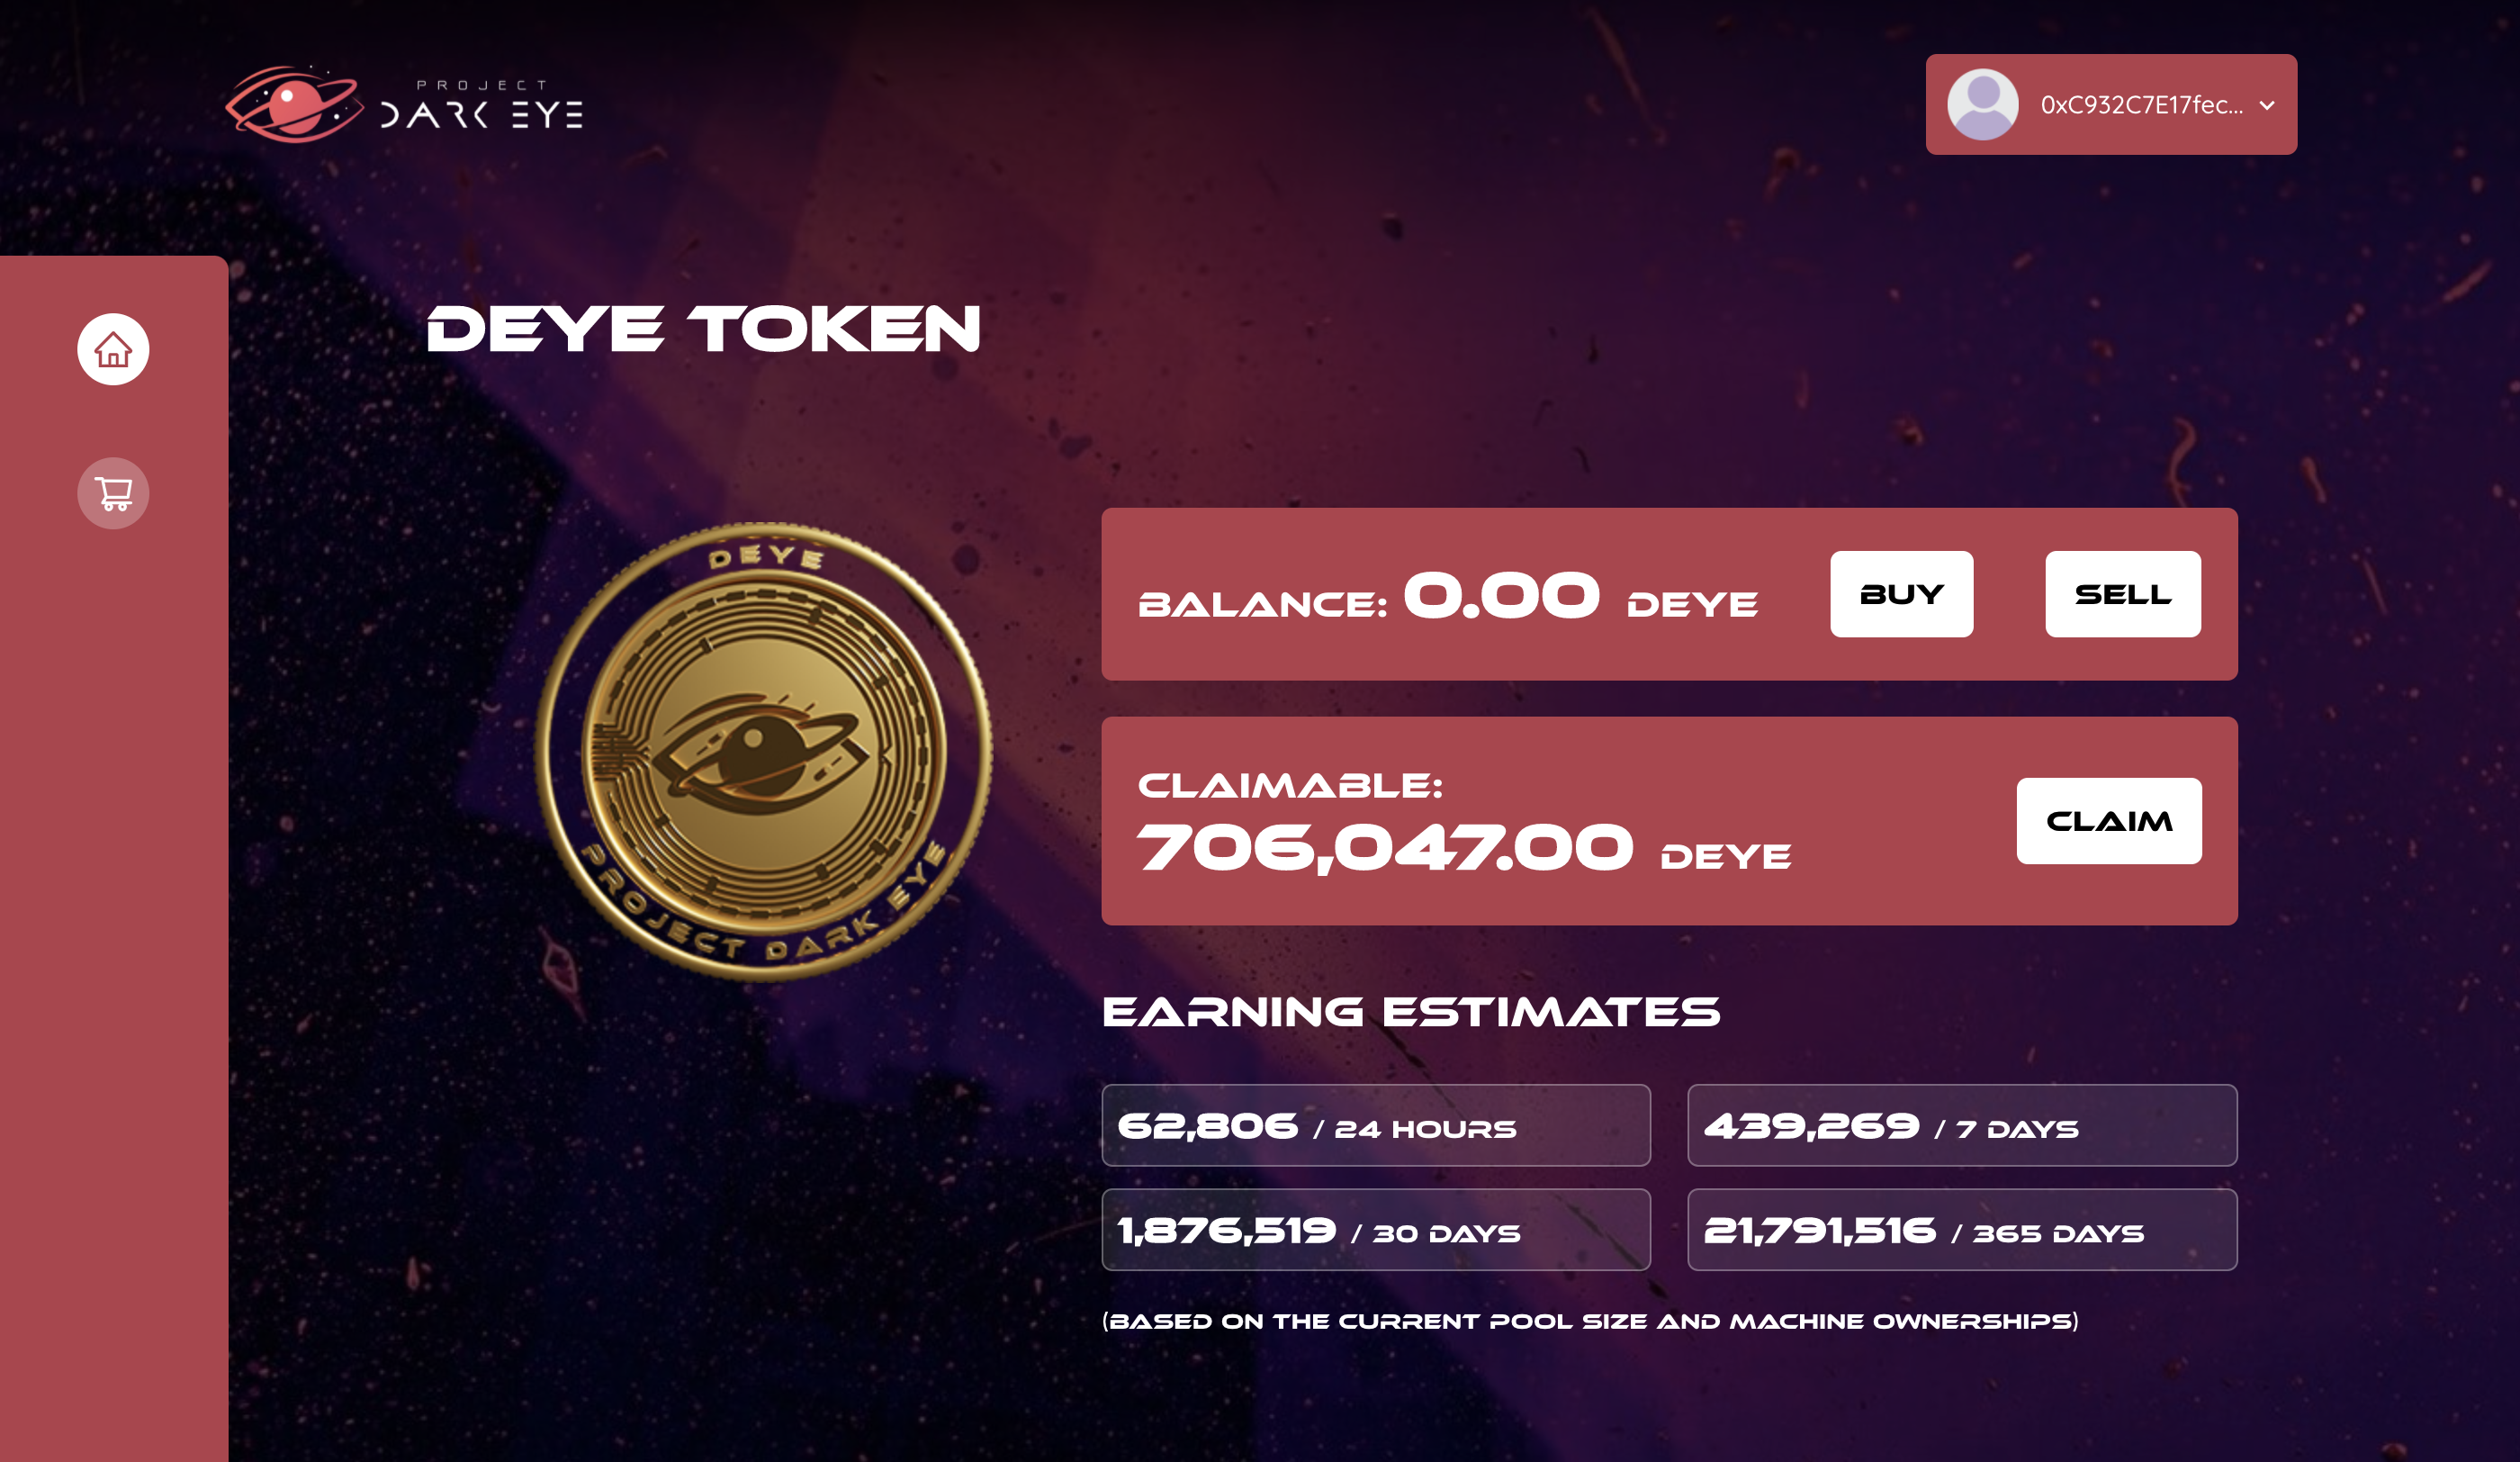 DEYE tokens claimable from 5/4 9:00 PM PST